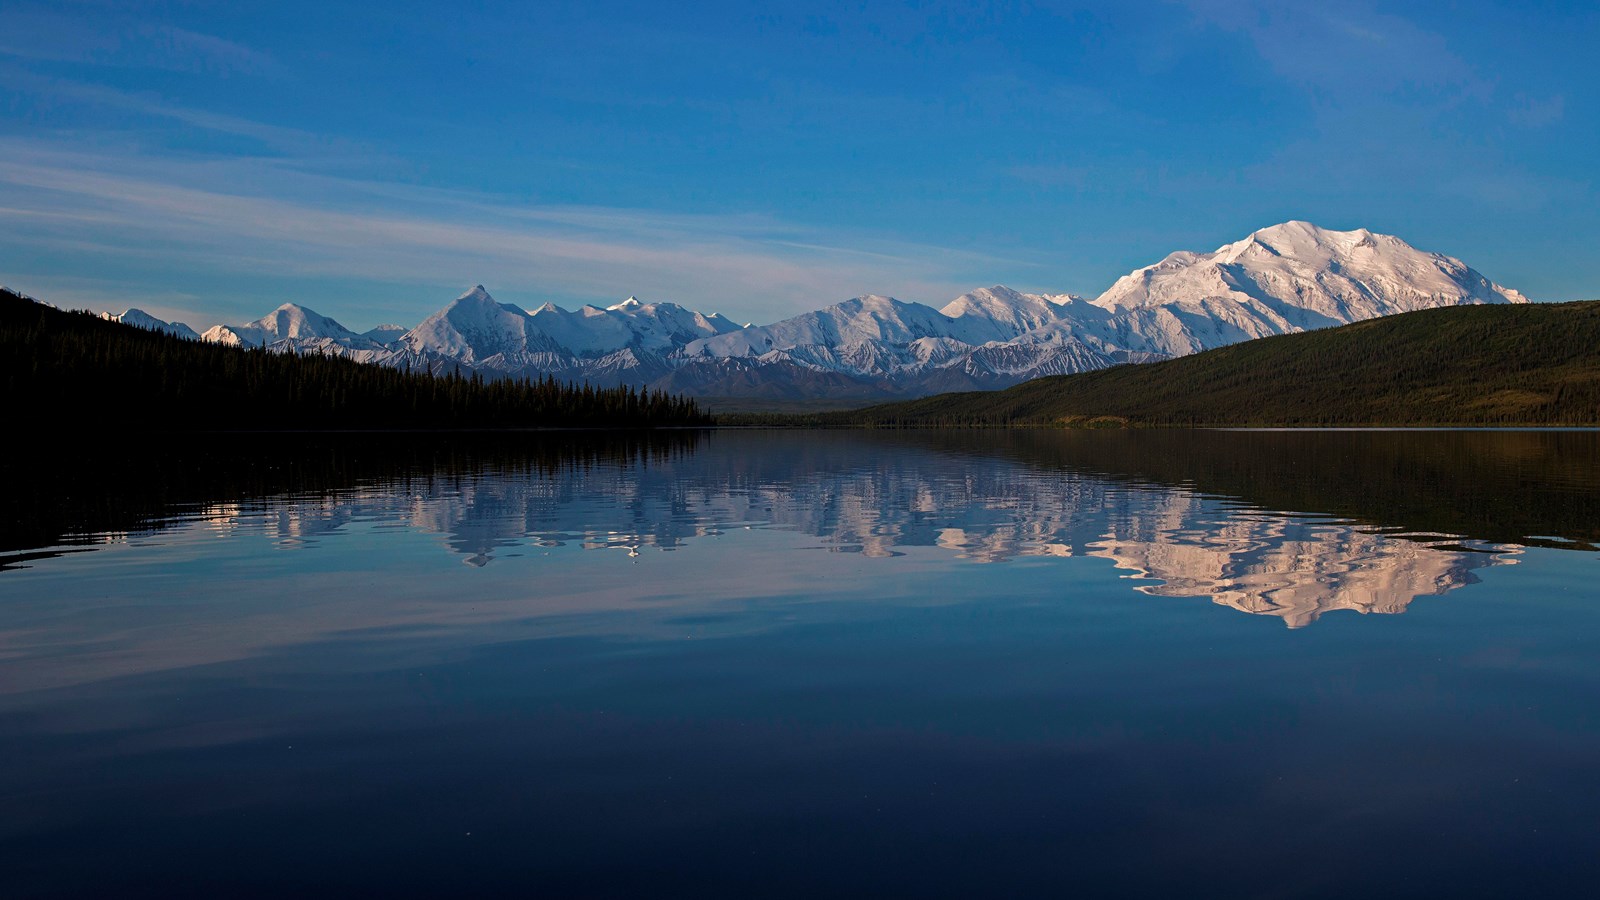 A long blue lake with Denali and other snowy mountains in the distance.